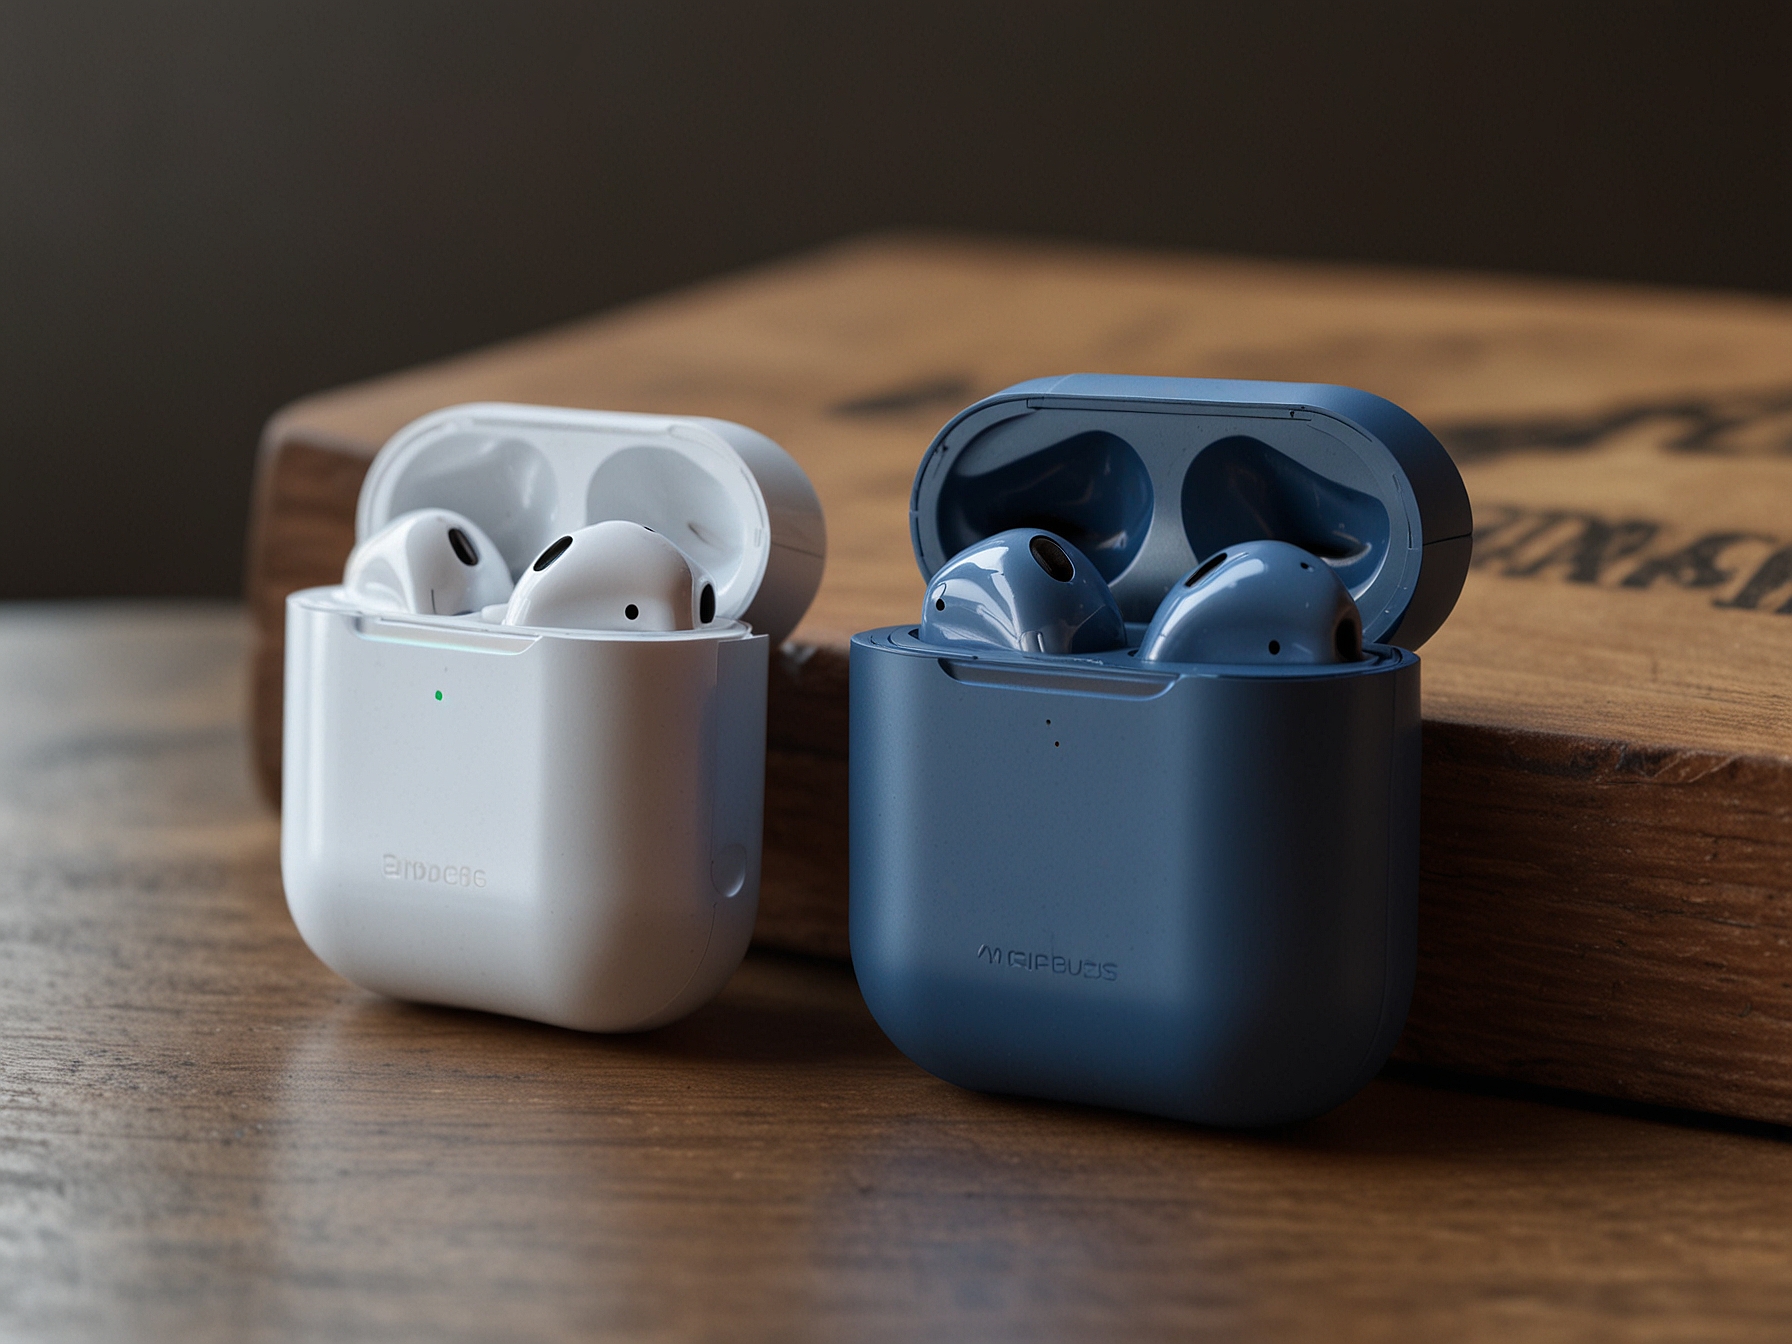 A side-by-side comparison of the leaked Galaxy Buds 3 case and the AirPods Pro case, highlighting their similar compact and sleek designs.